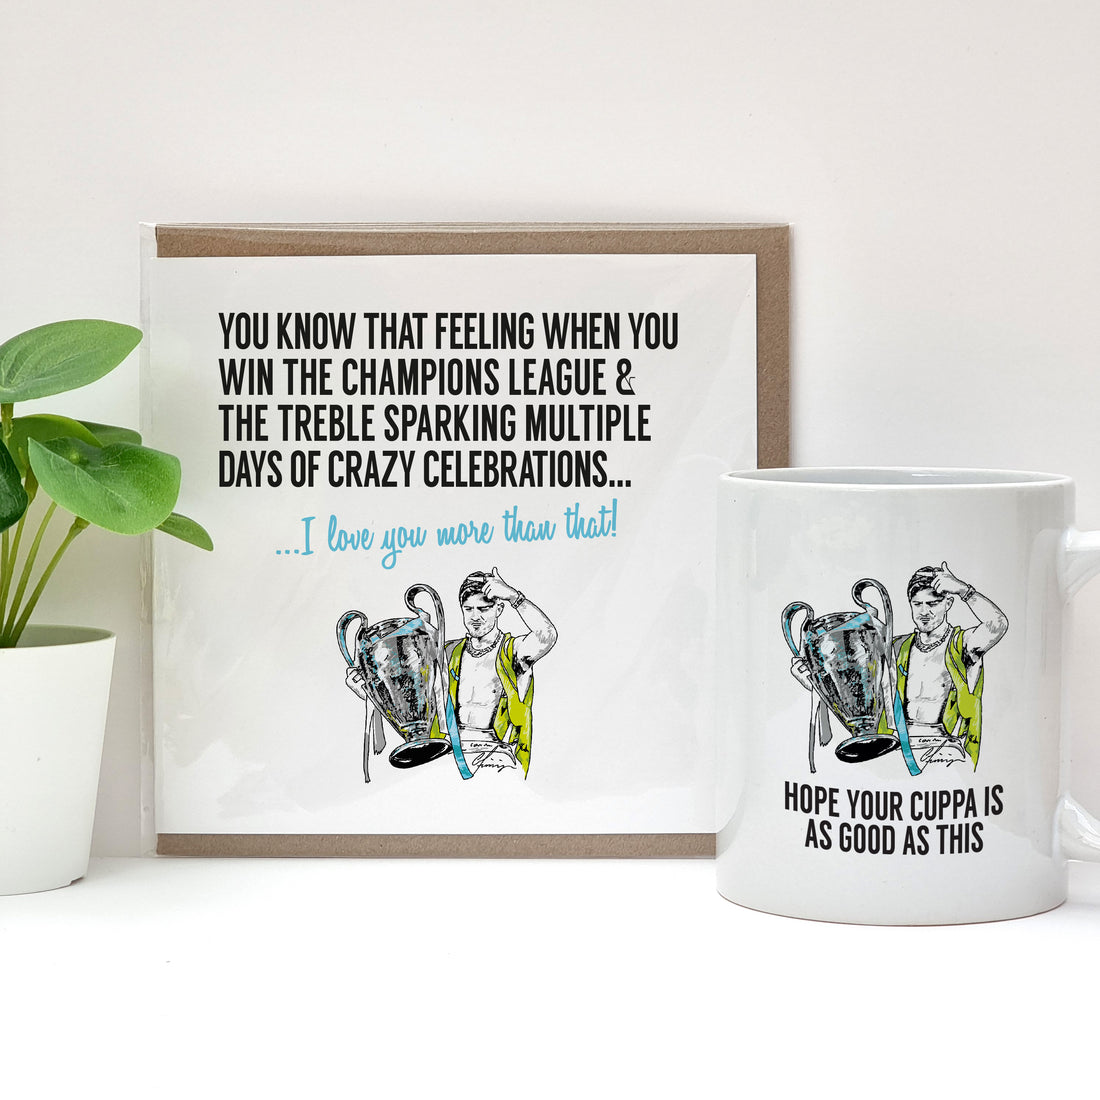 jack grealish manchster city football club themed card and mug gifts based on the celebrations after winning the treble and champions league final